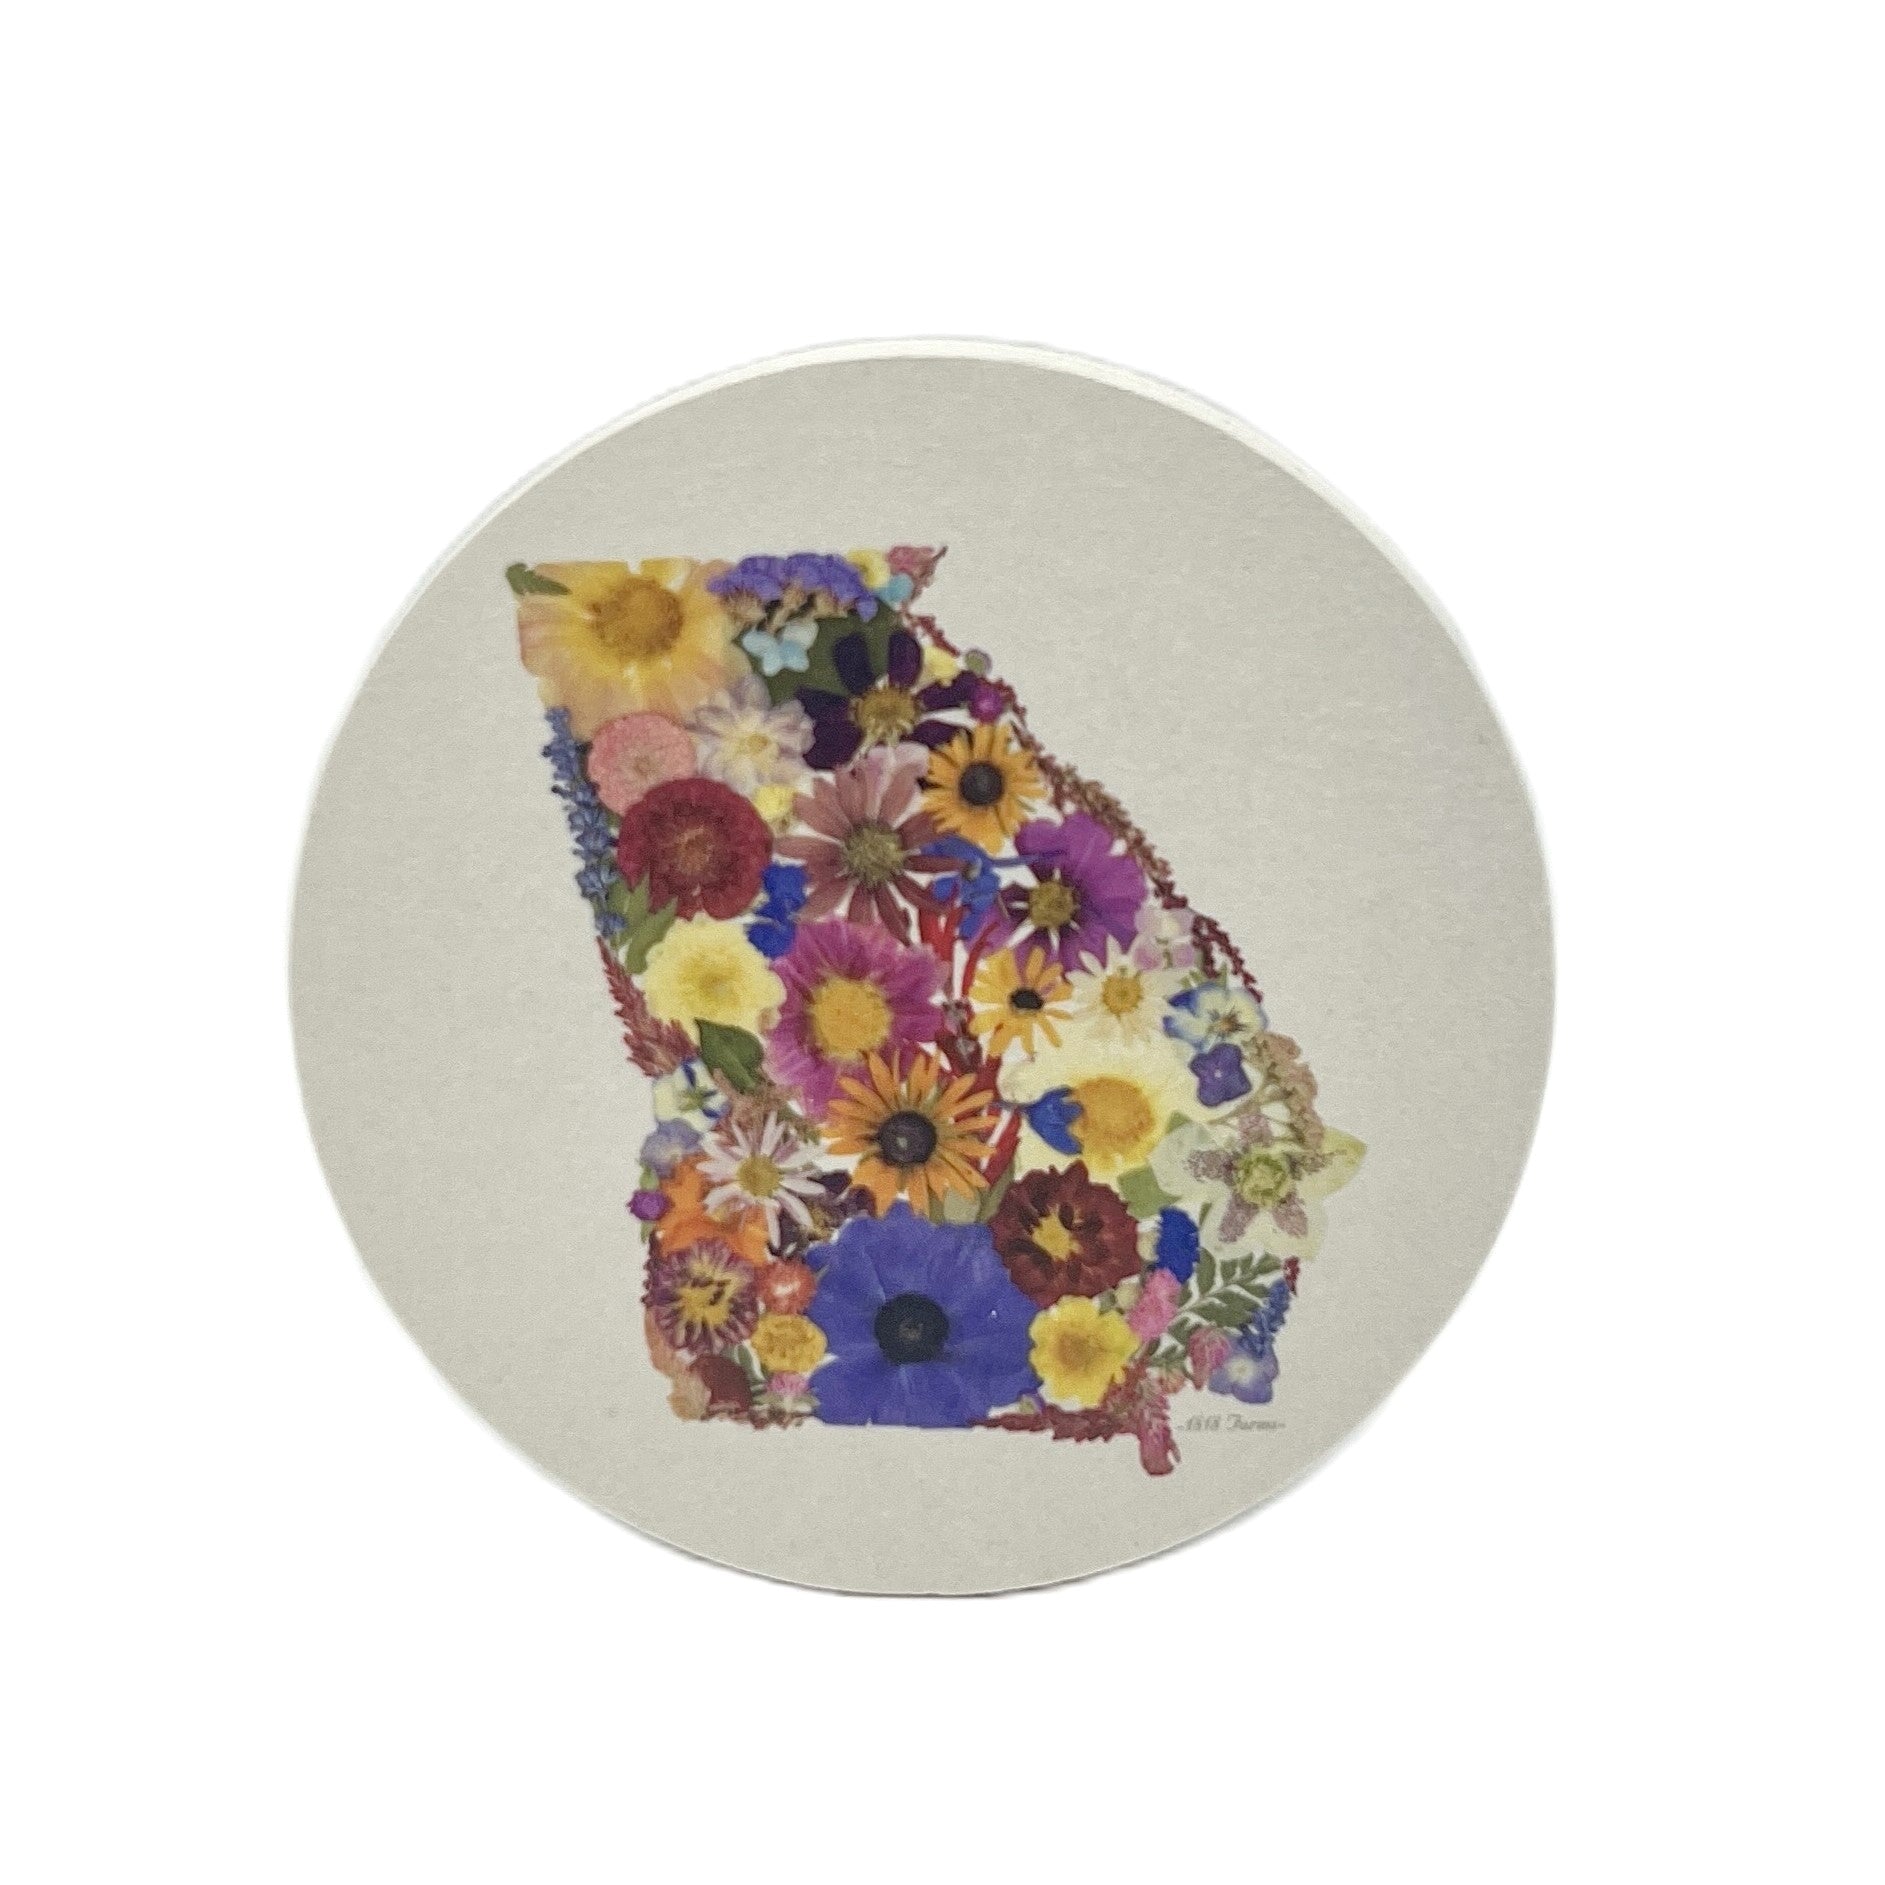 State Themed Drink Coasters (Set of 6) Featuring Dried, Pressed Flowers - "Where I Bloom" Collection Coaster 1818 Farms Georgia  